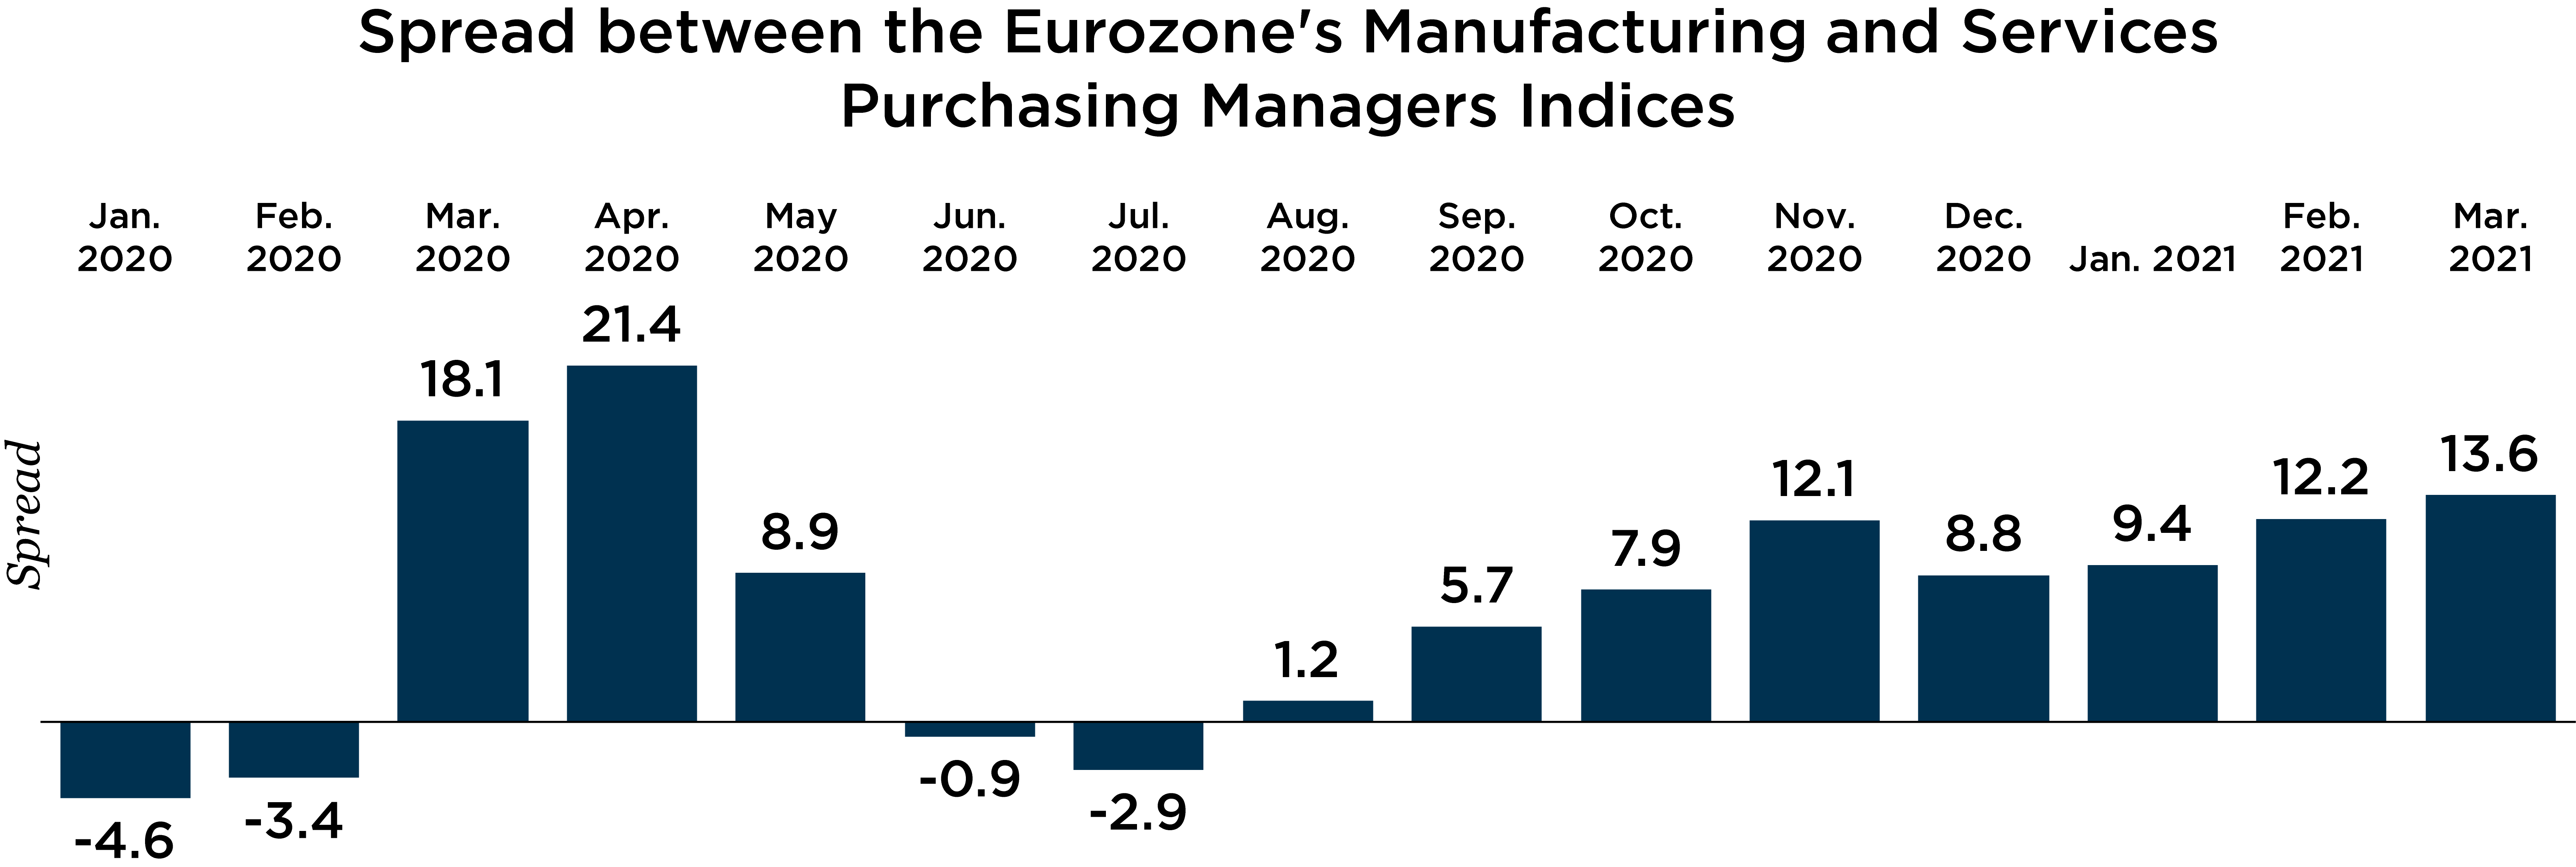 chart depicting the spread between the Eurozone's manufacturing and services purchasing managers indices